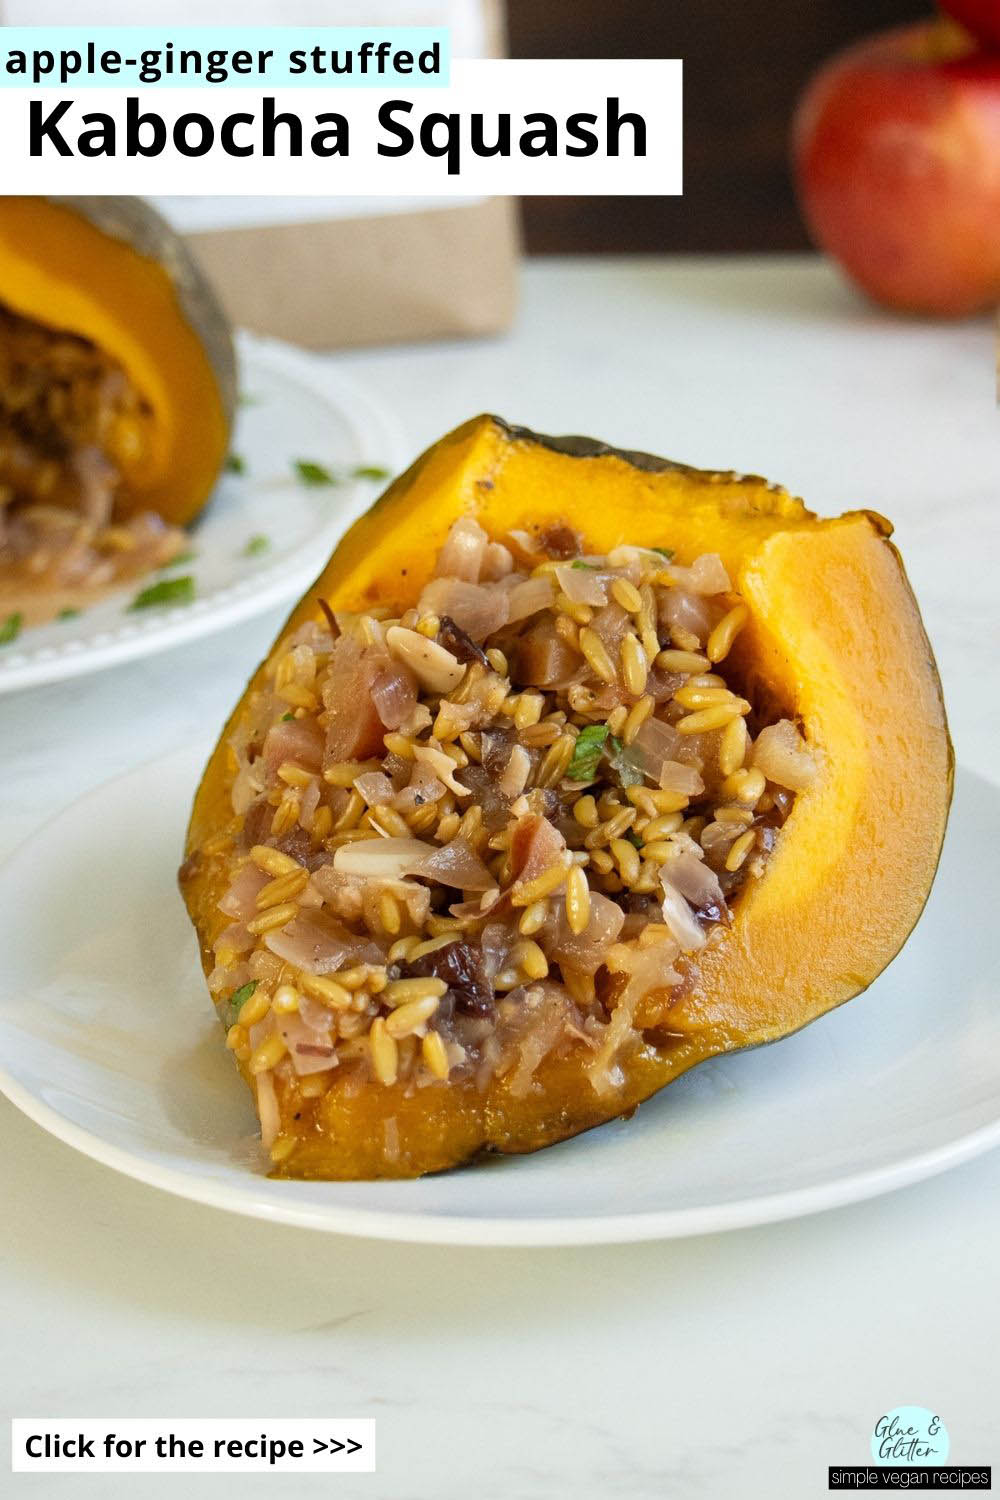 slice of stuffed kabocha squash on a plate with the whole squash in the background, text overlay